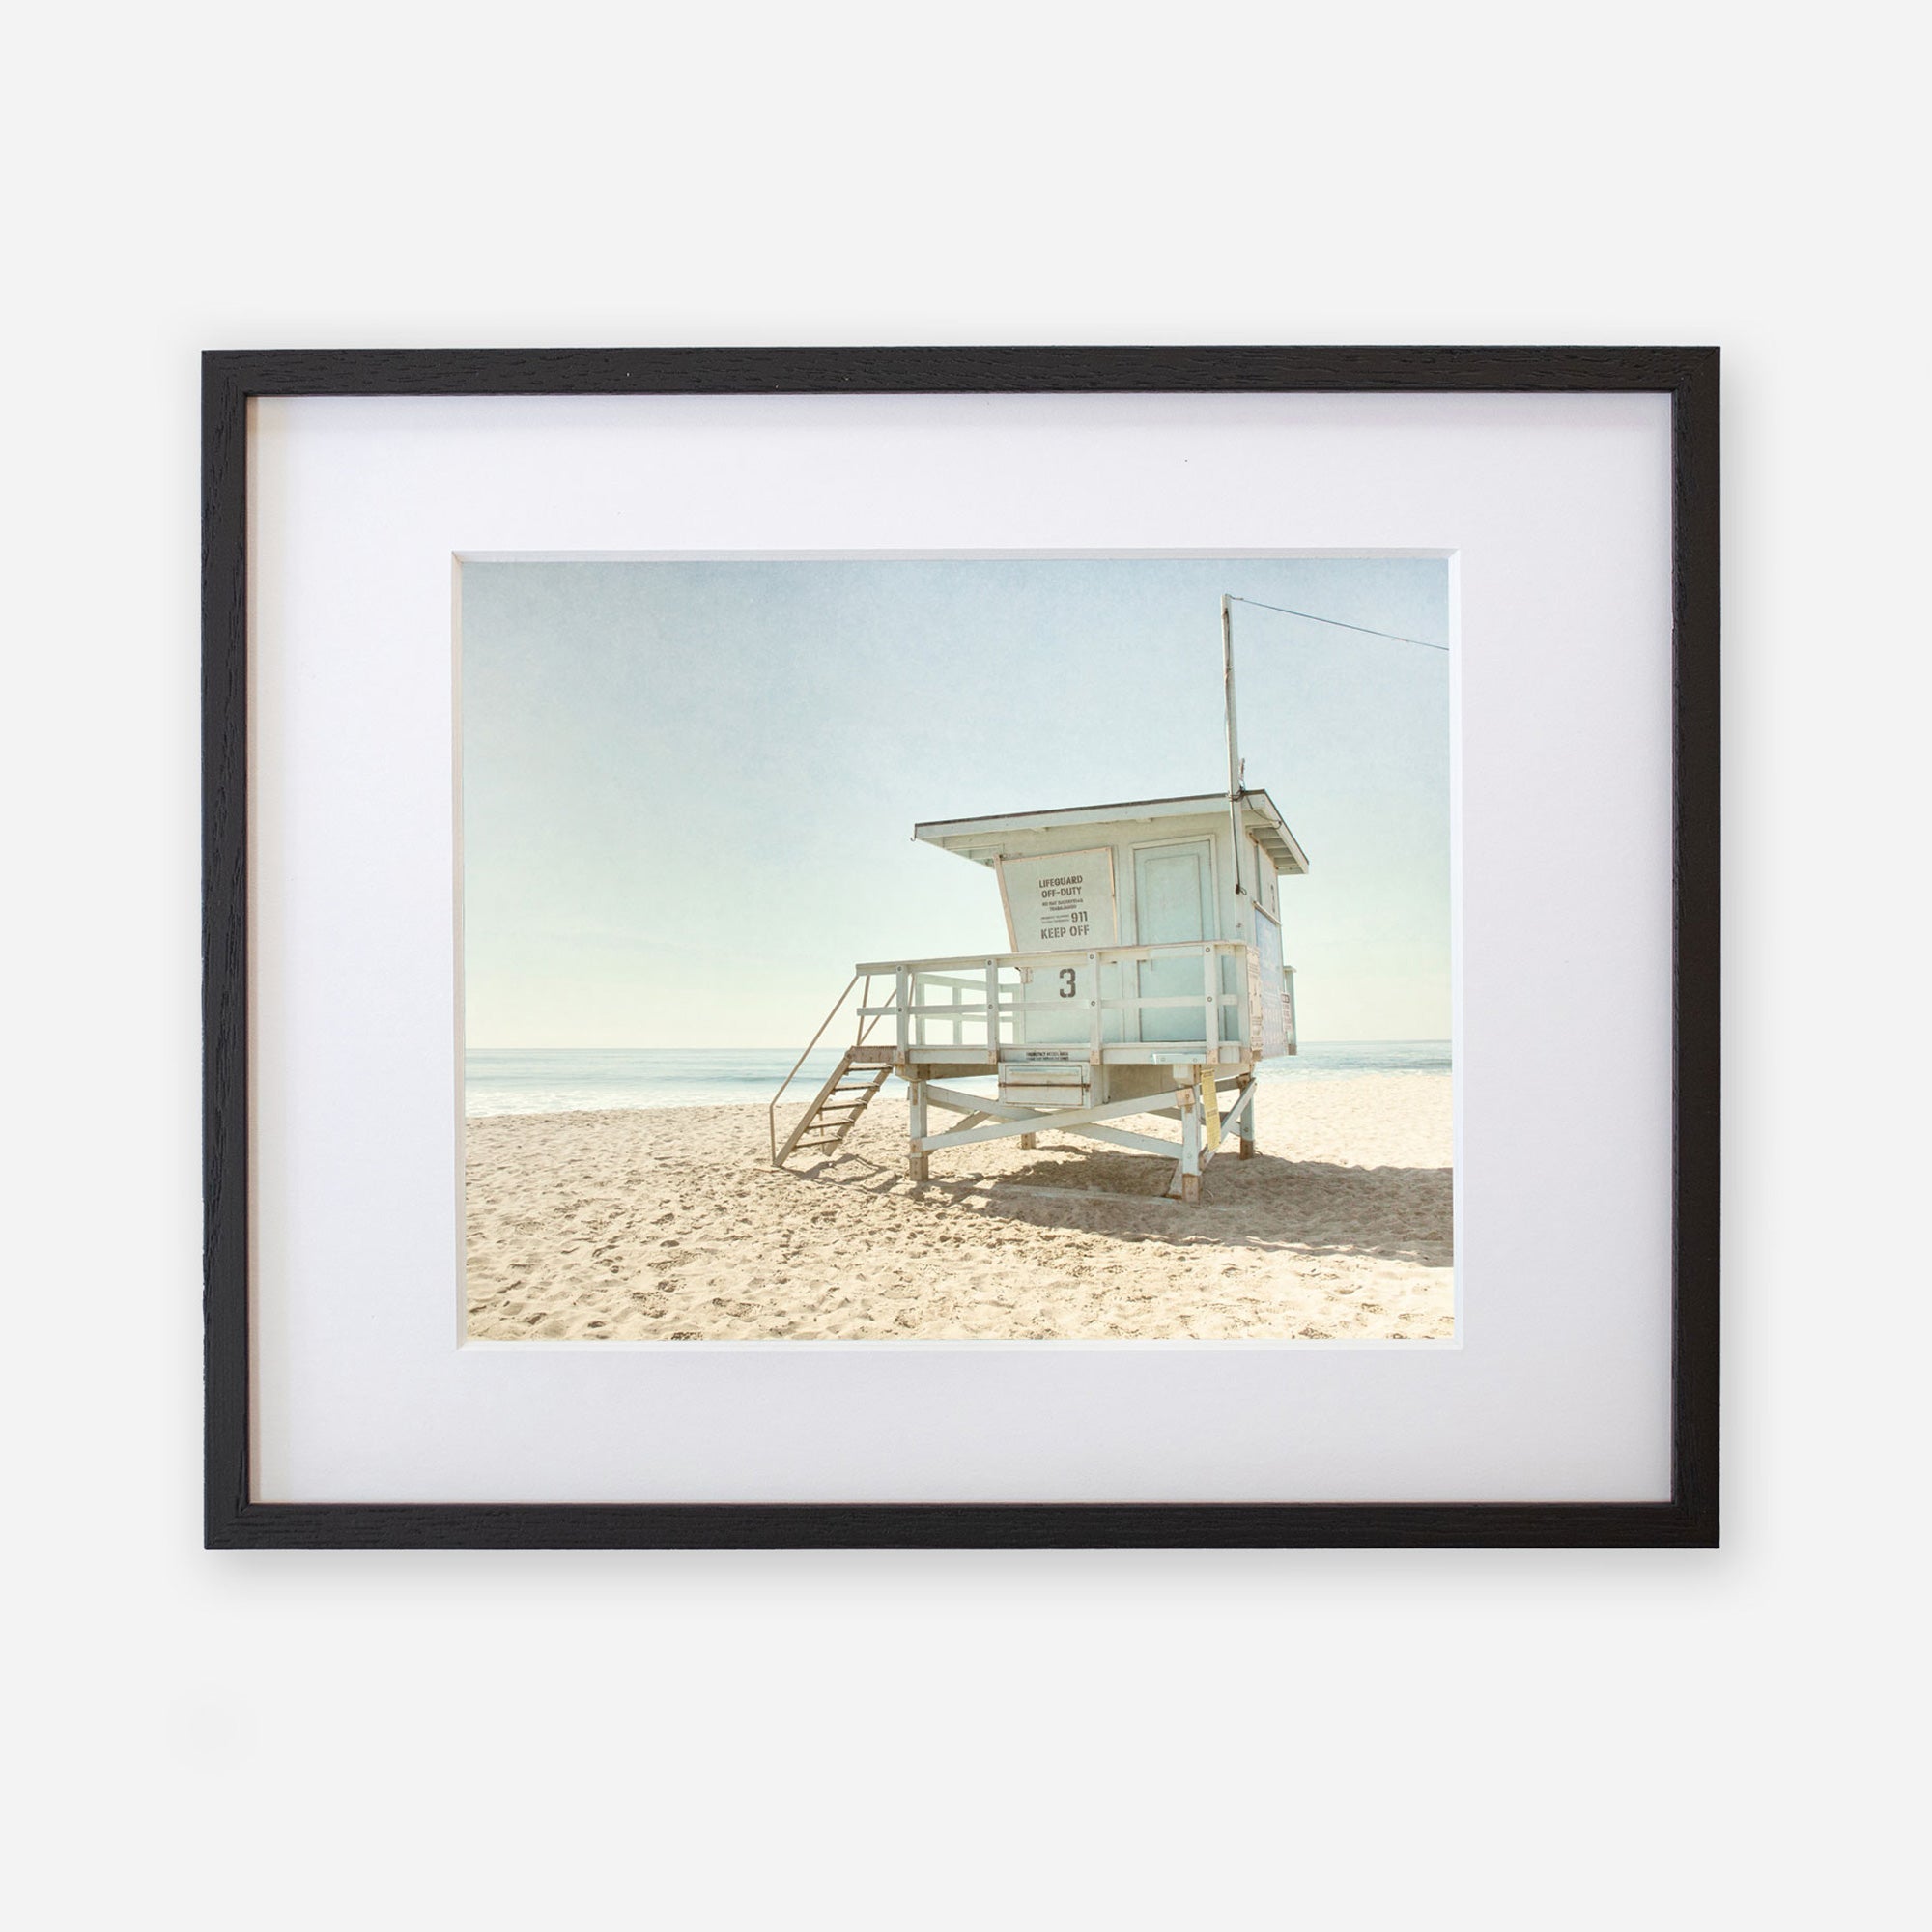 A framed Offley Green photograph depicts a lone lifeguard tower in Malibu on a sandy beach under a clear sky, creating a serene coastal scene.